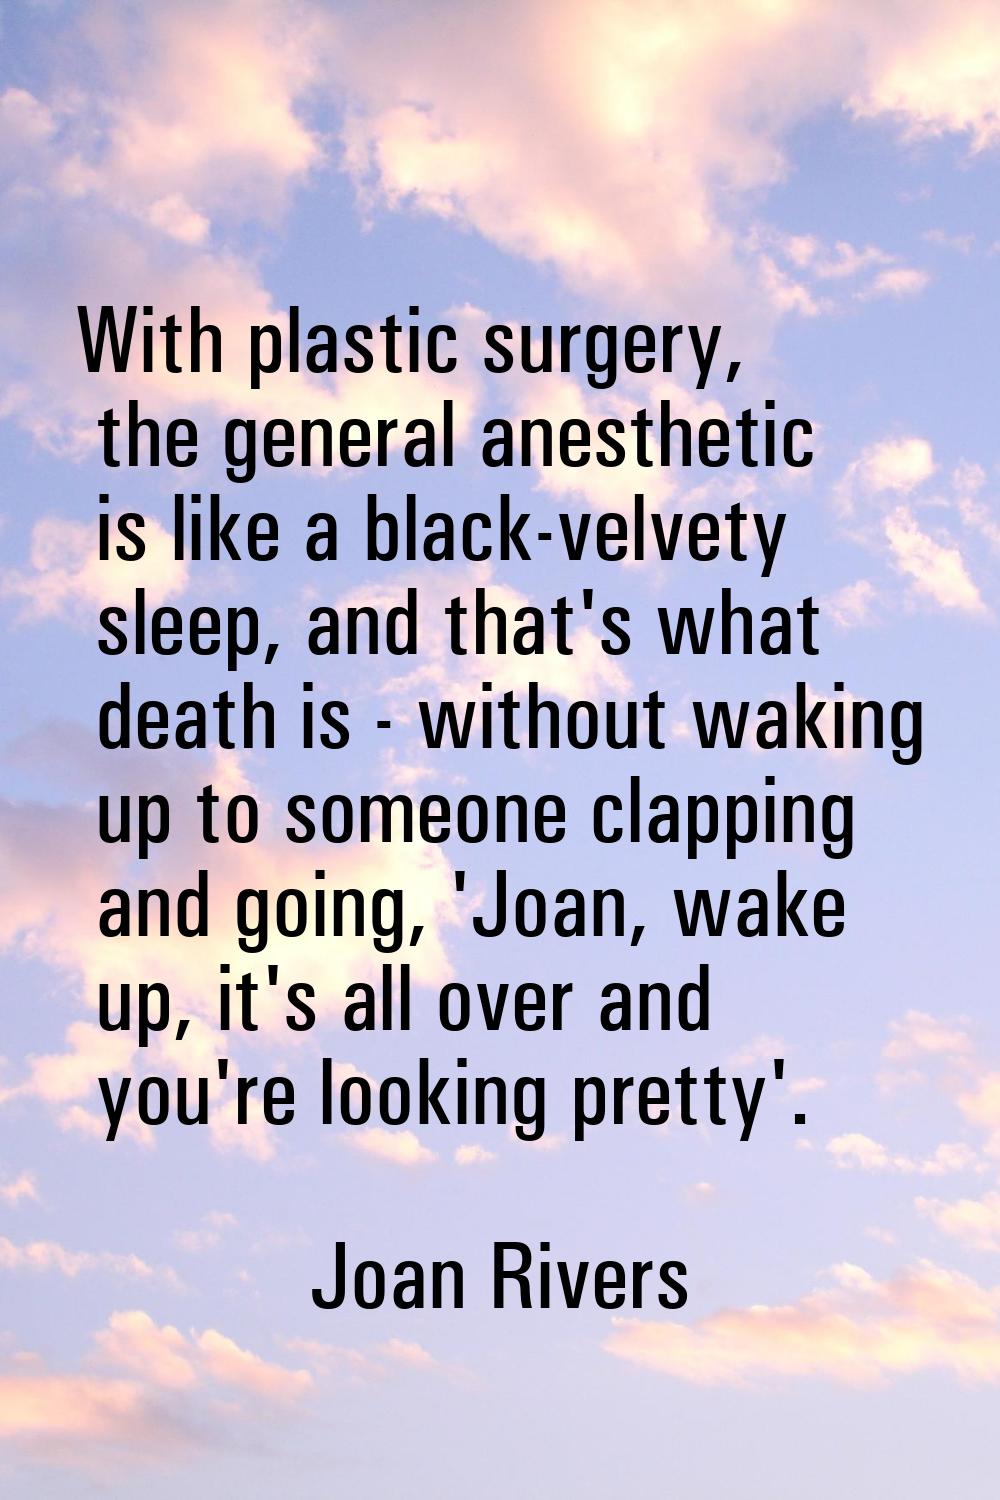 With plastic surgery, the general anesthetic is like a black-velvety sleep, and that's what death i